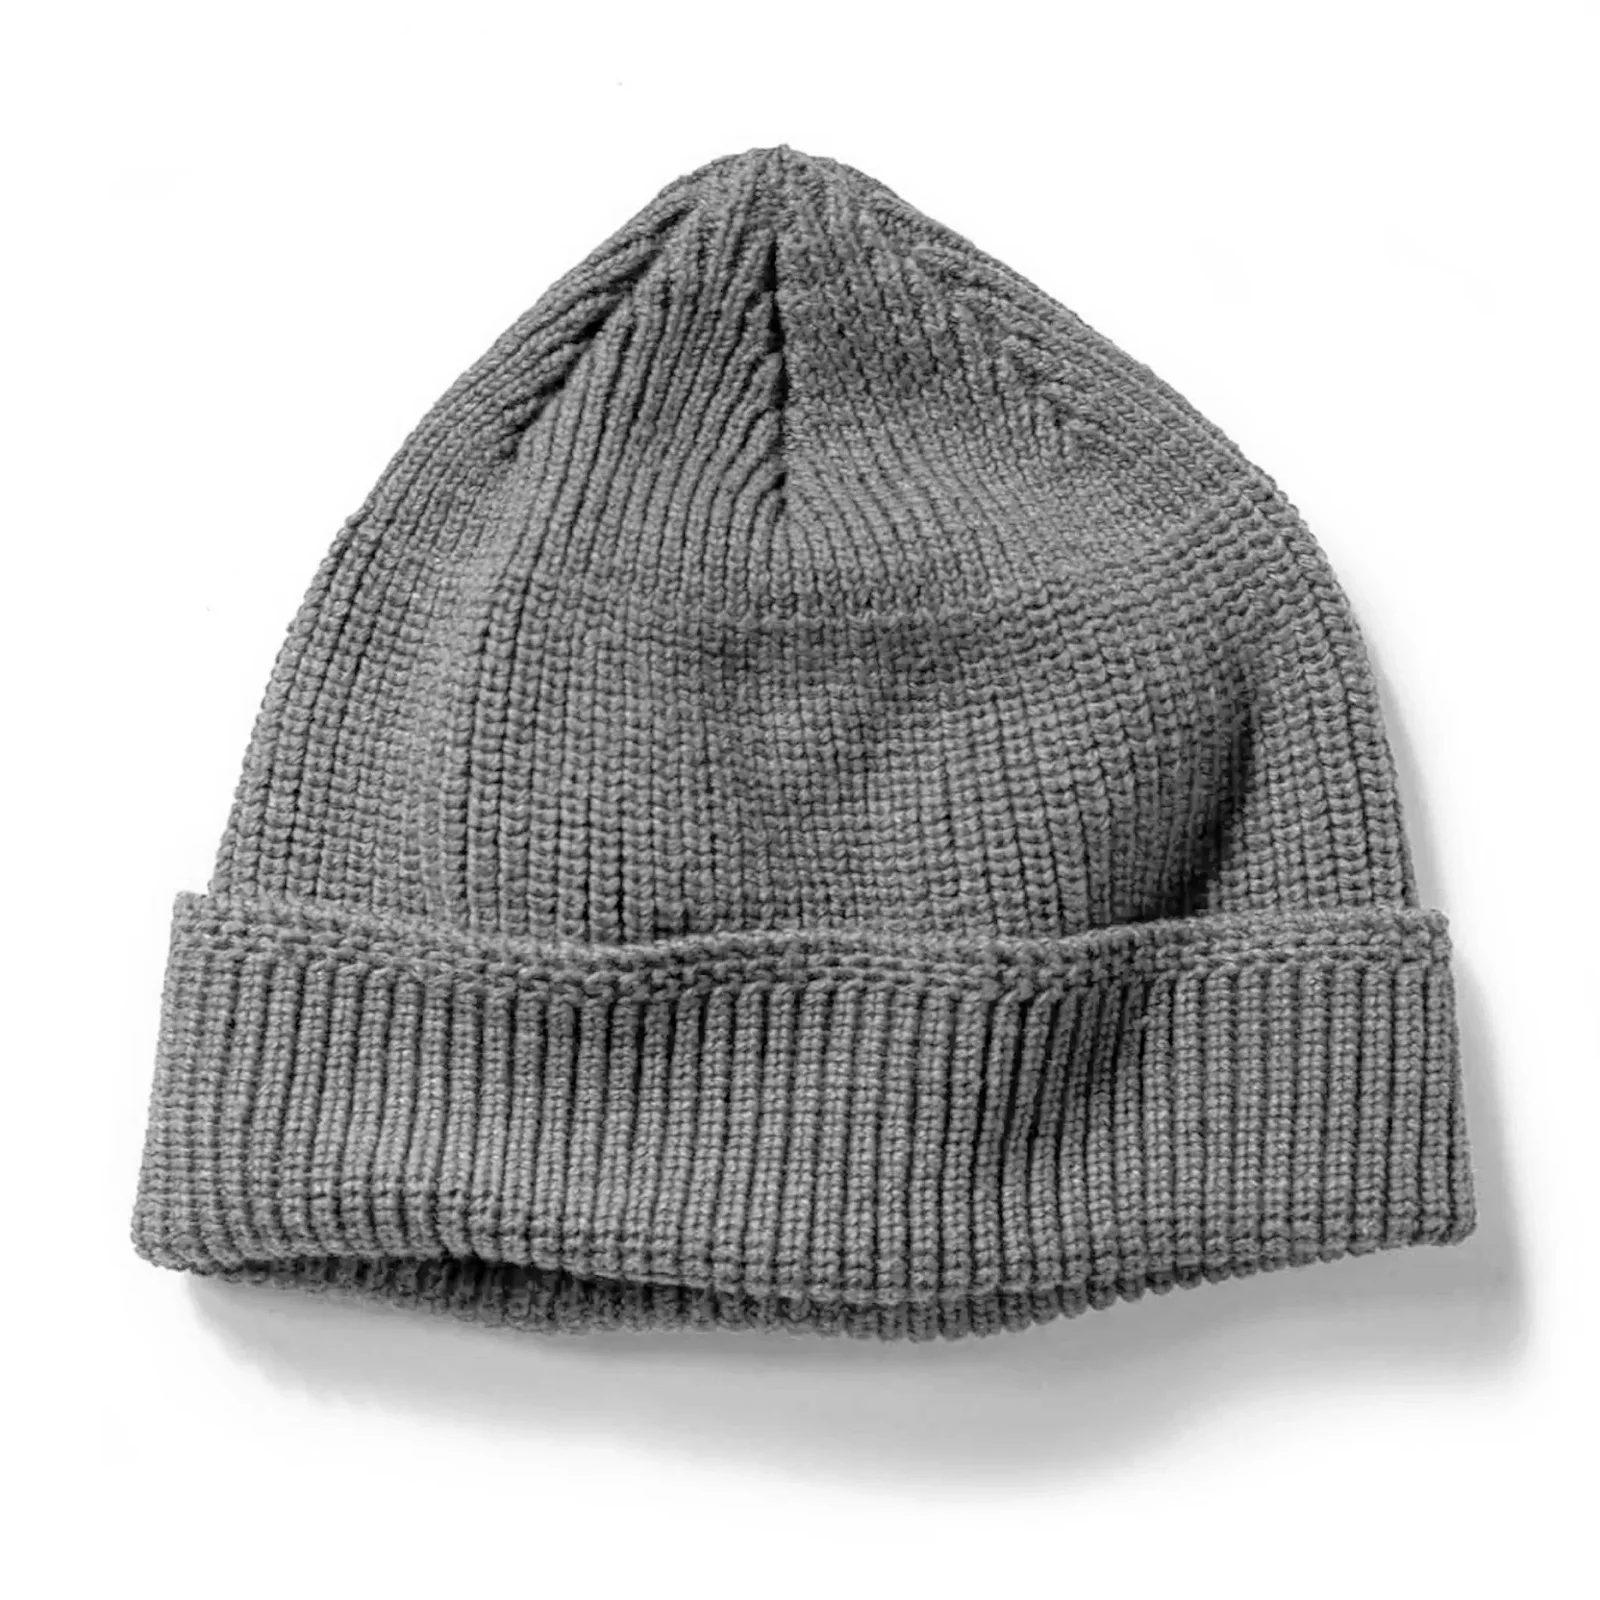 Image of The Rib Beanie in Heather Grey